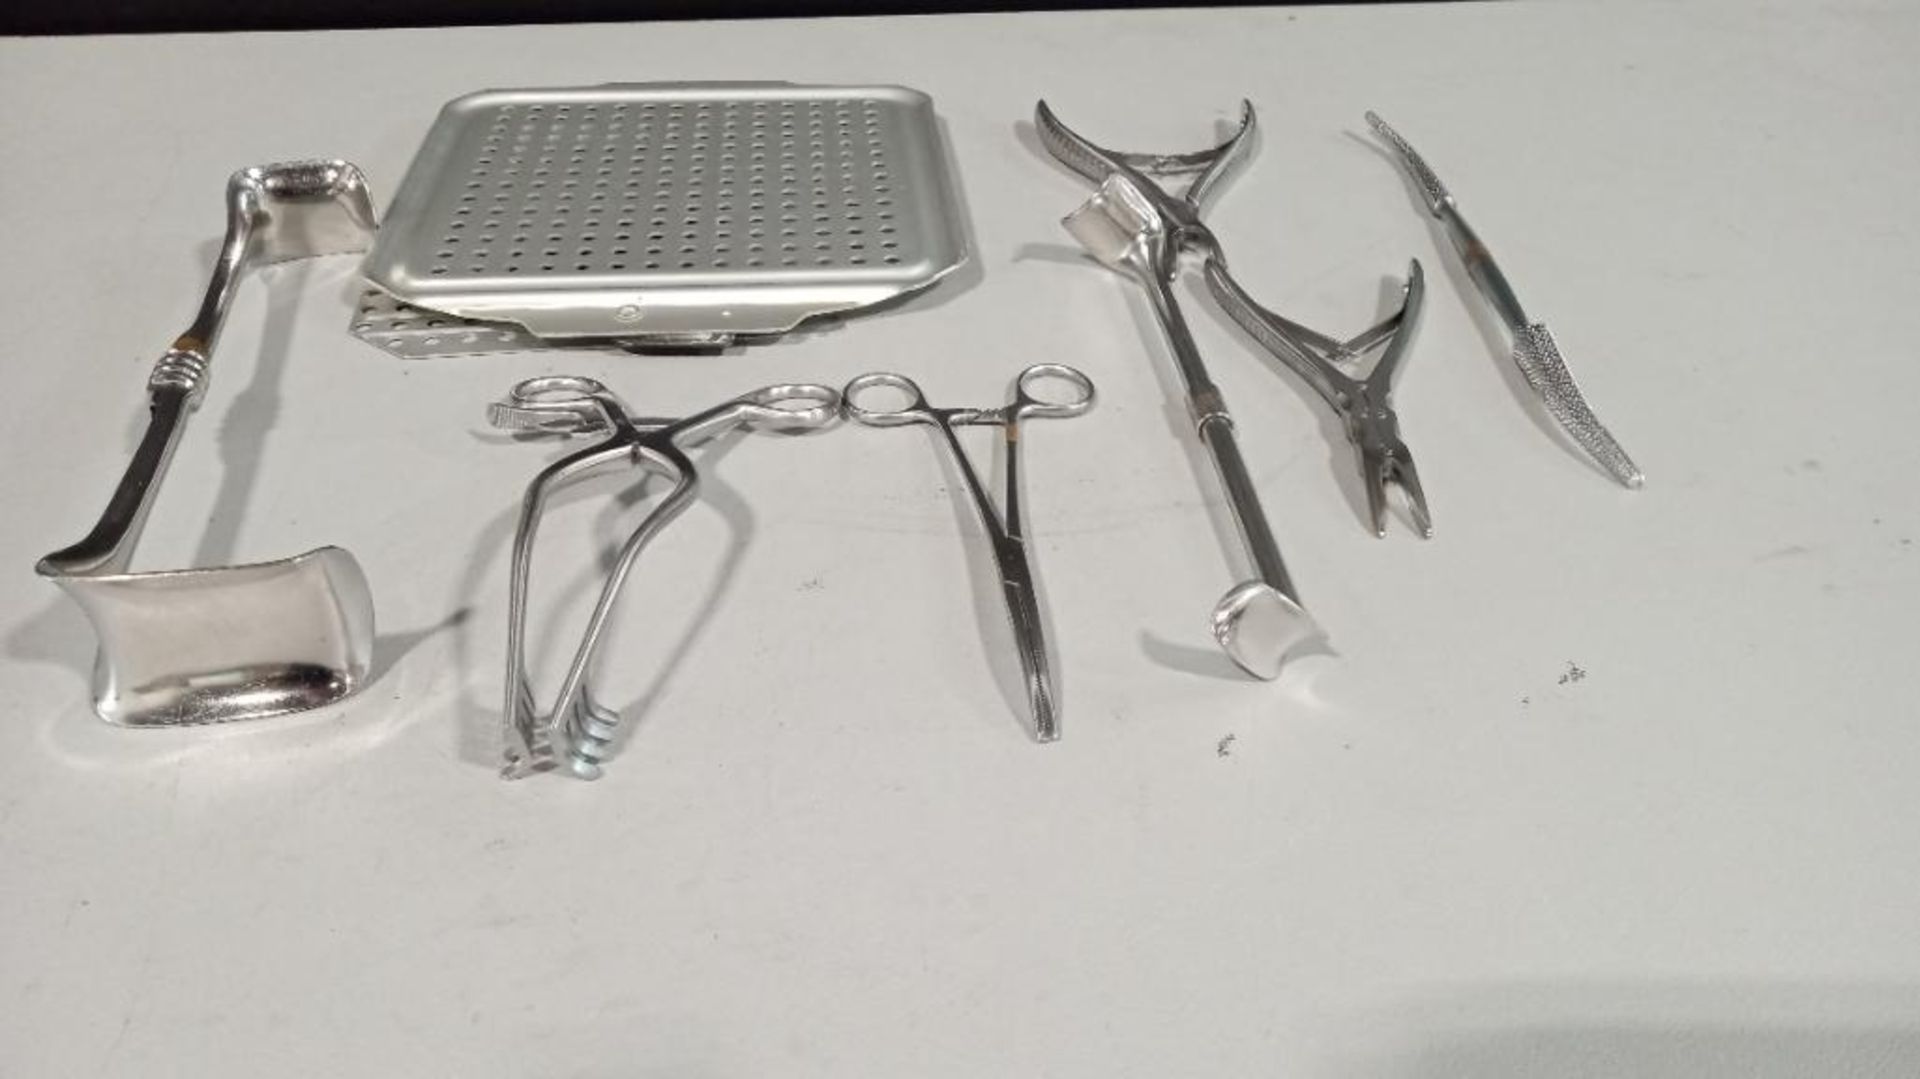 GENERAL SURGERY INSTRUMENT SET - Image 2 of 2